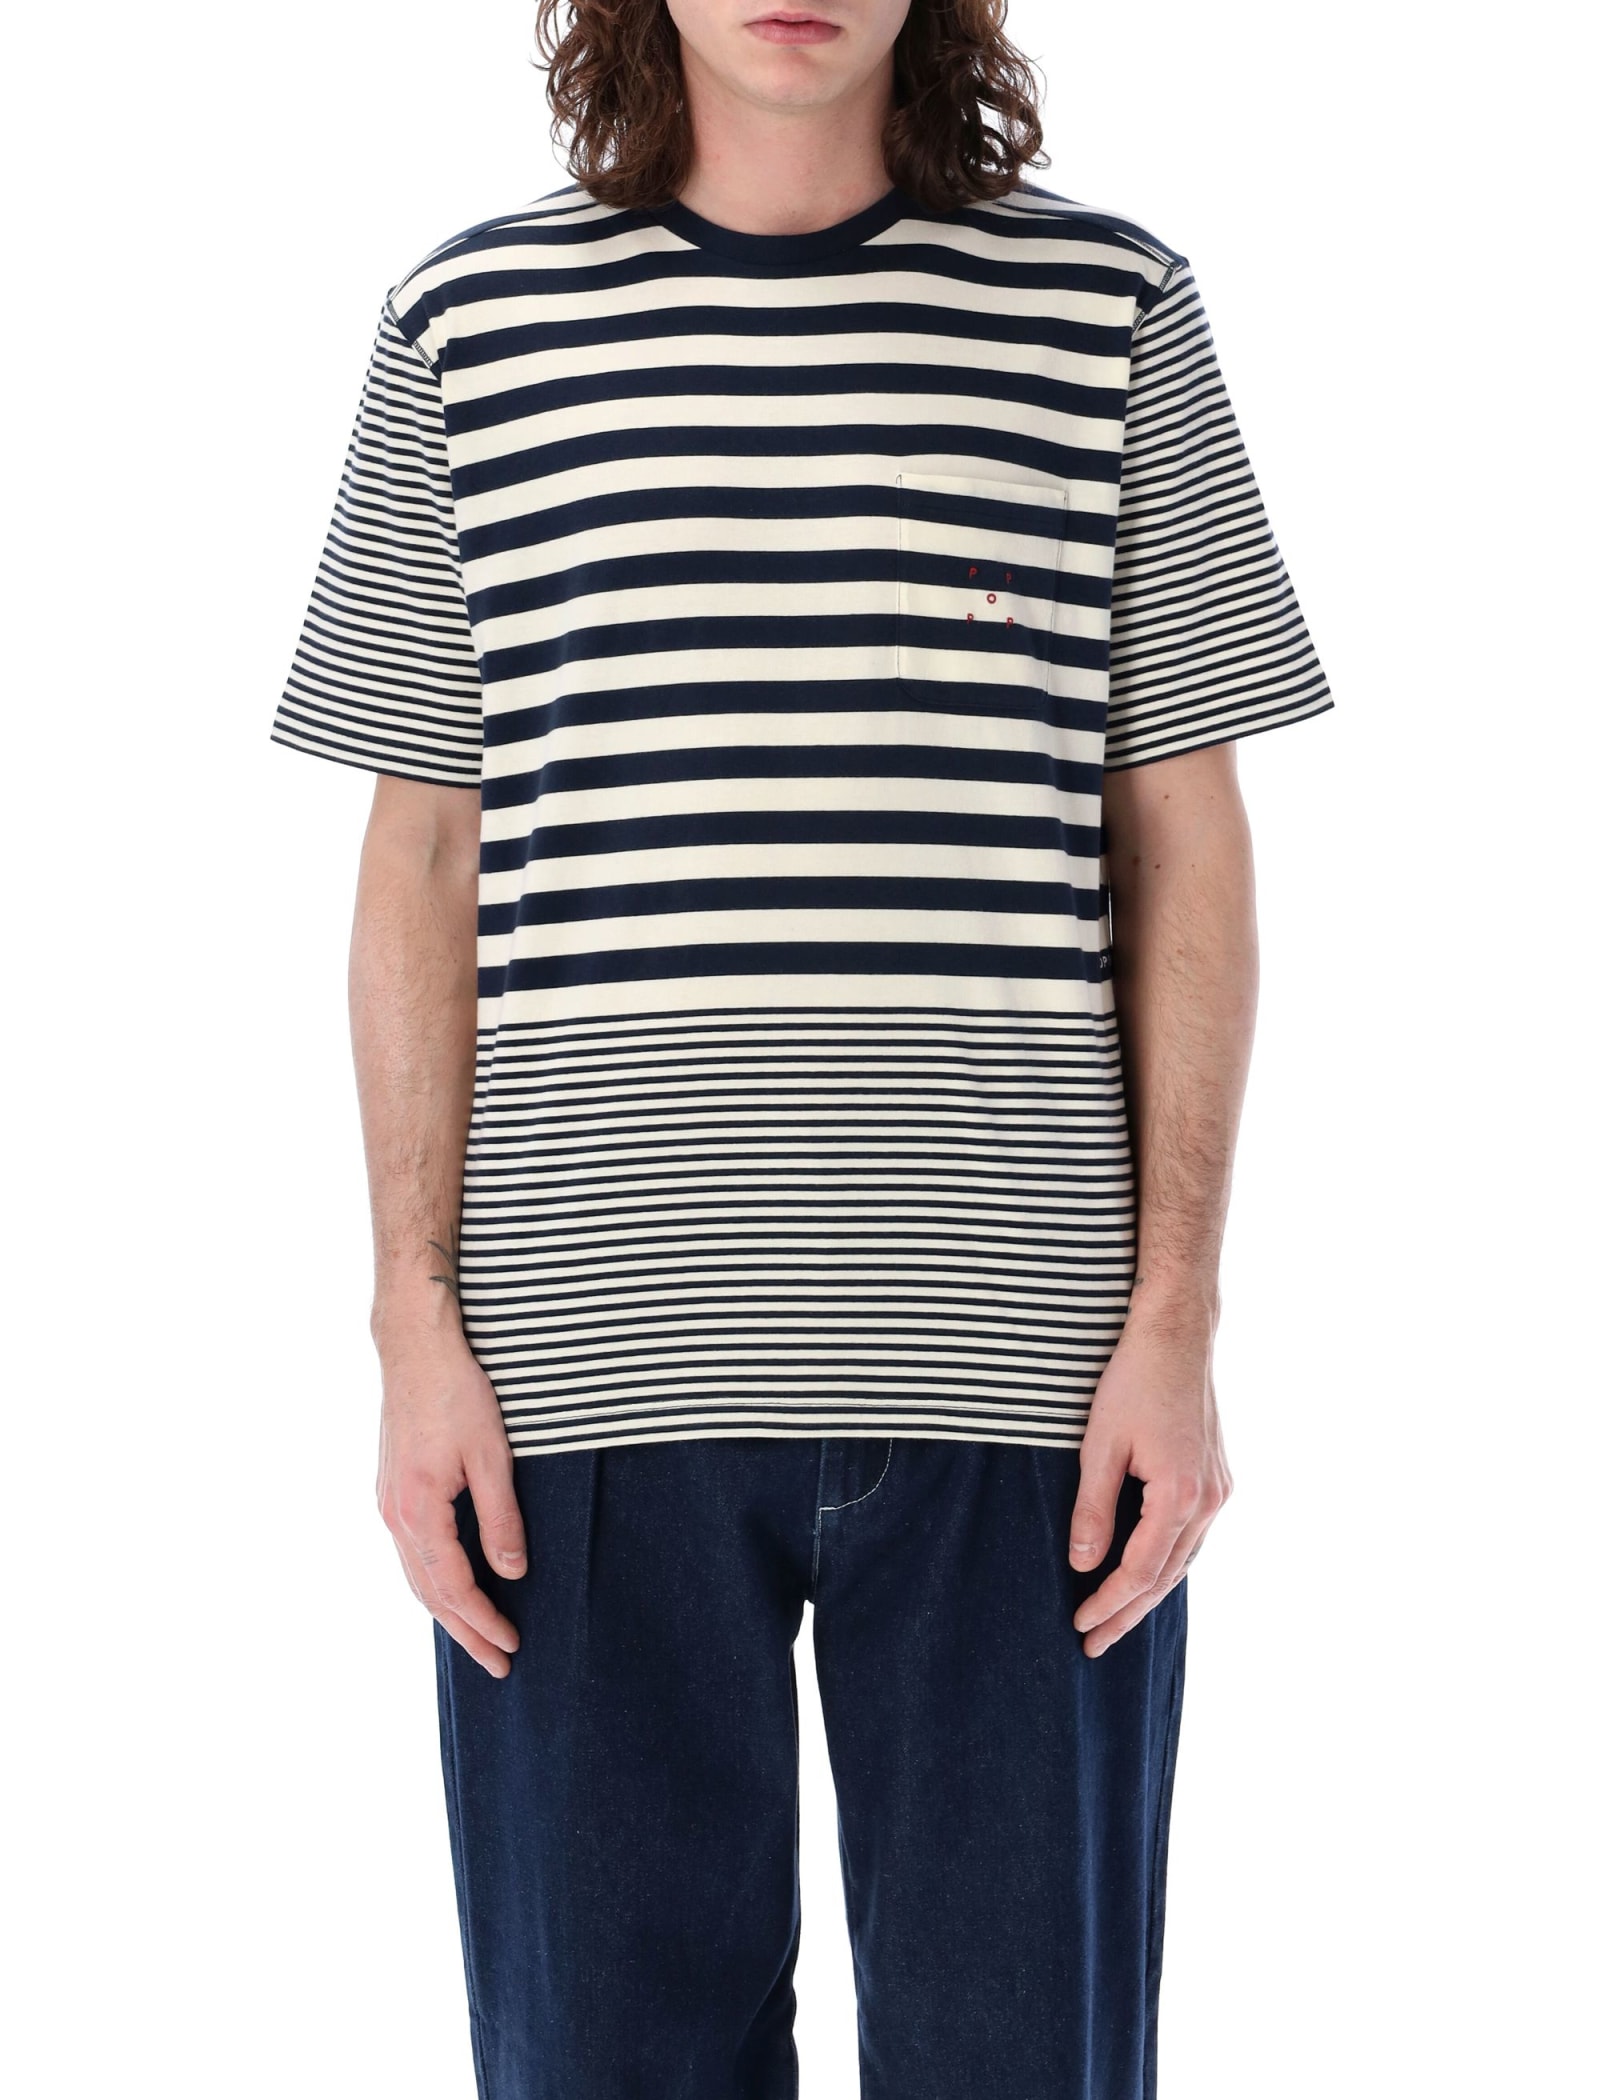 Pop Trading Company Stripes Tee In Navy Off White